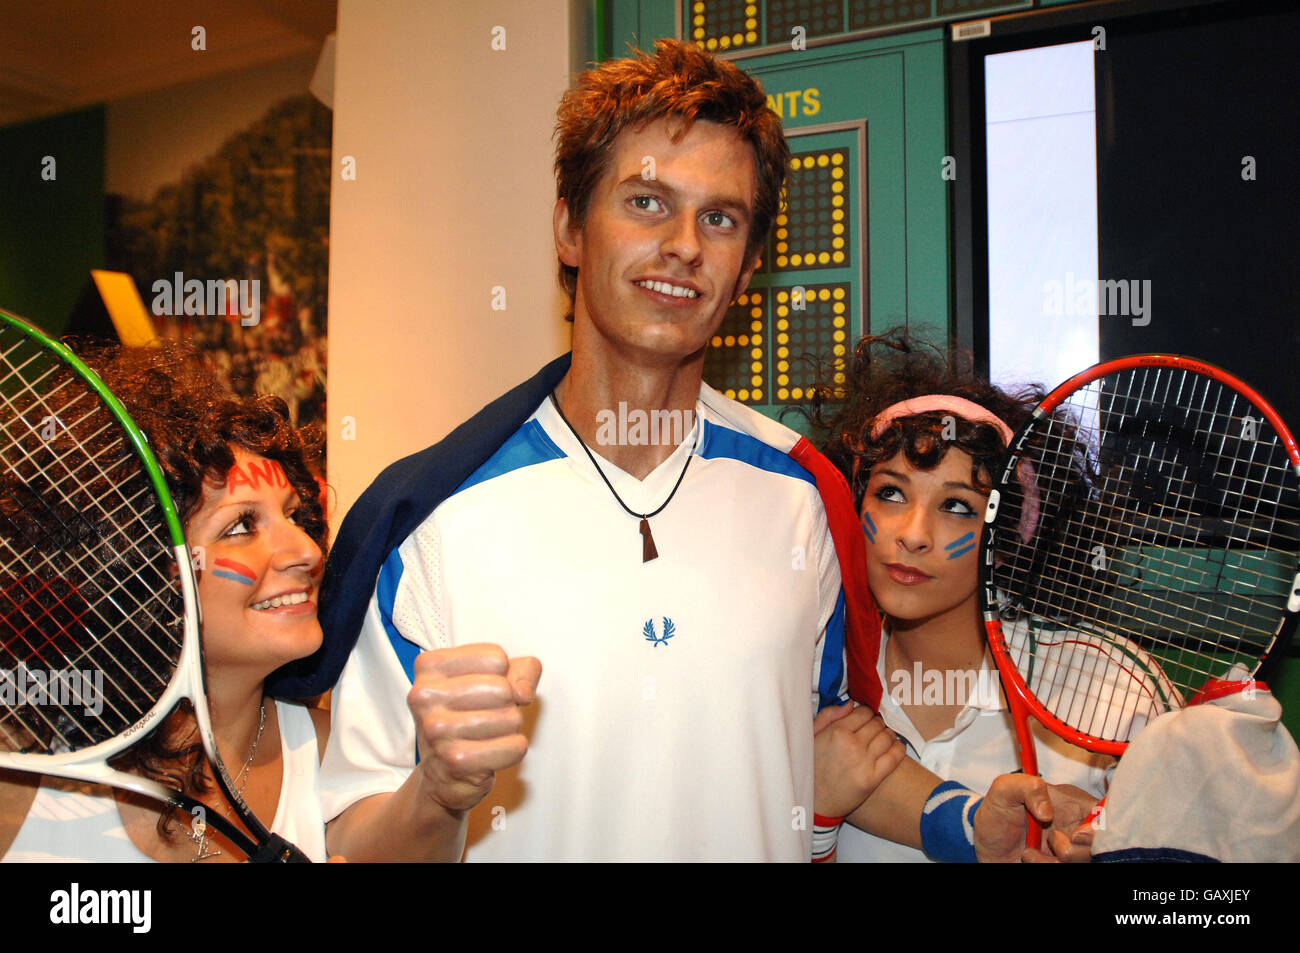 Wimbledon tennis fans pose for pictures with a waxwork of British tennis player Andy Murray at Madame Tussauds in central London. Stock Photo